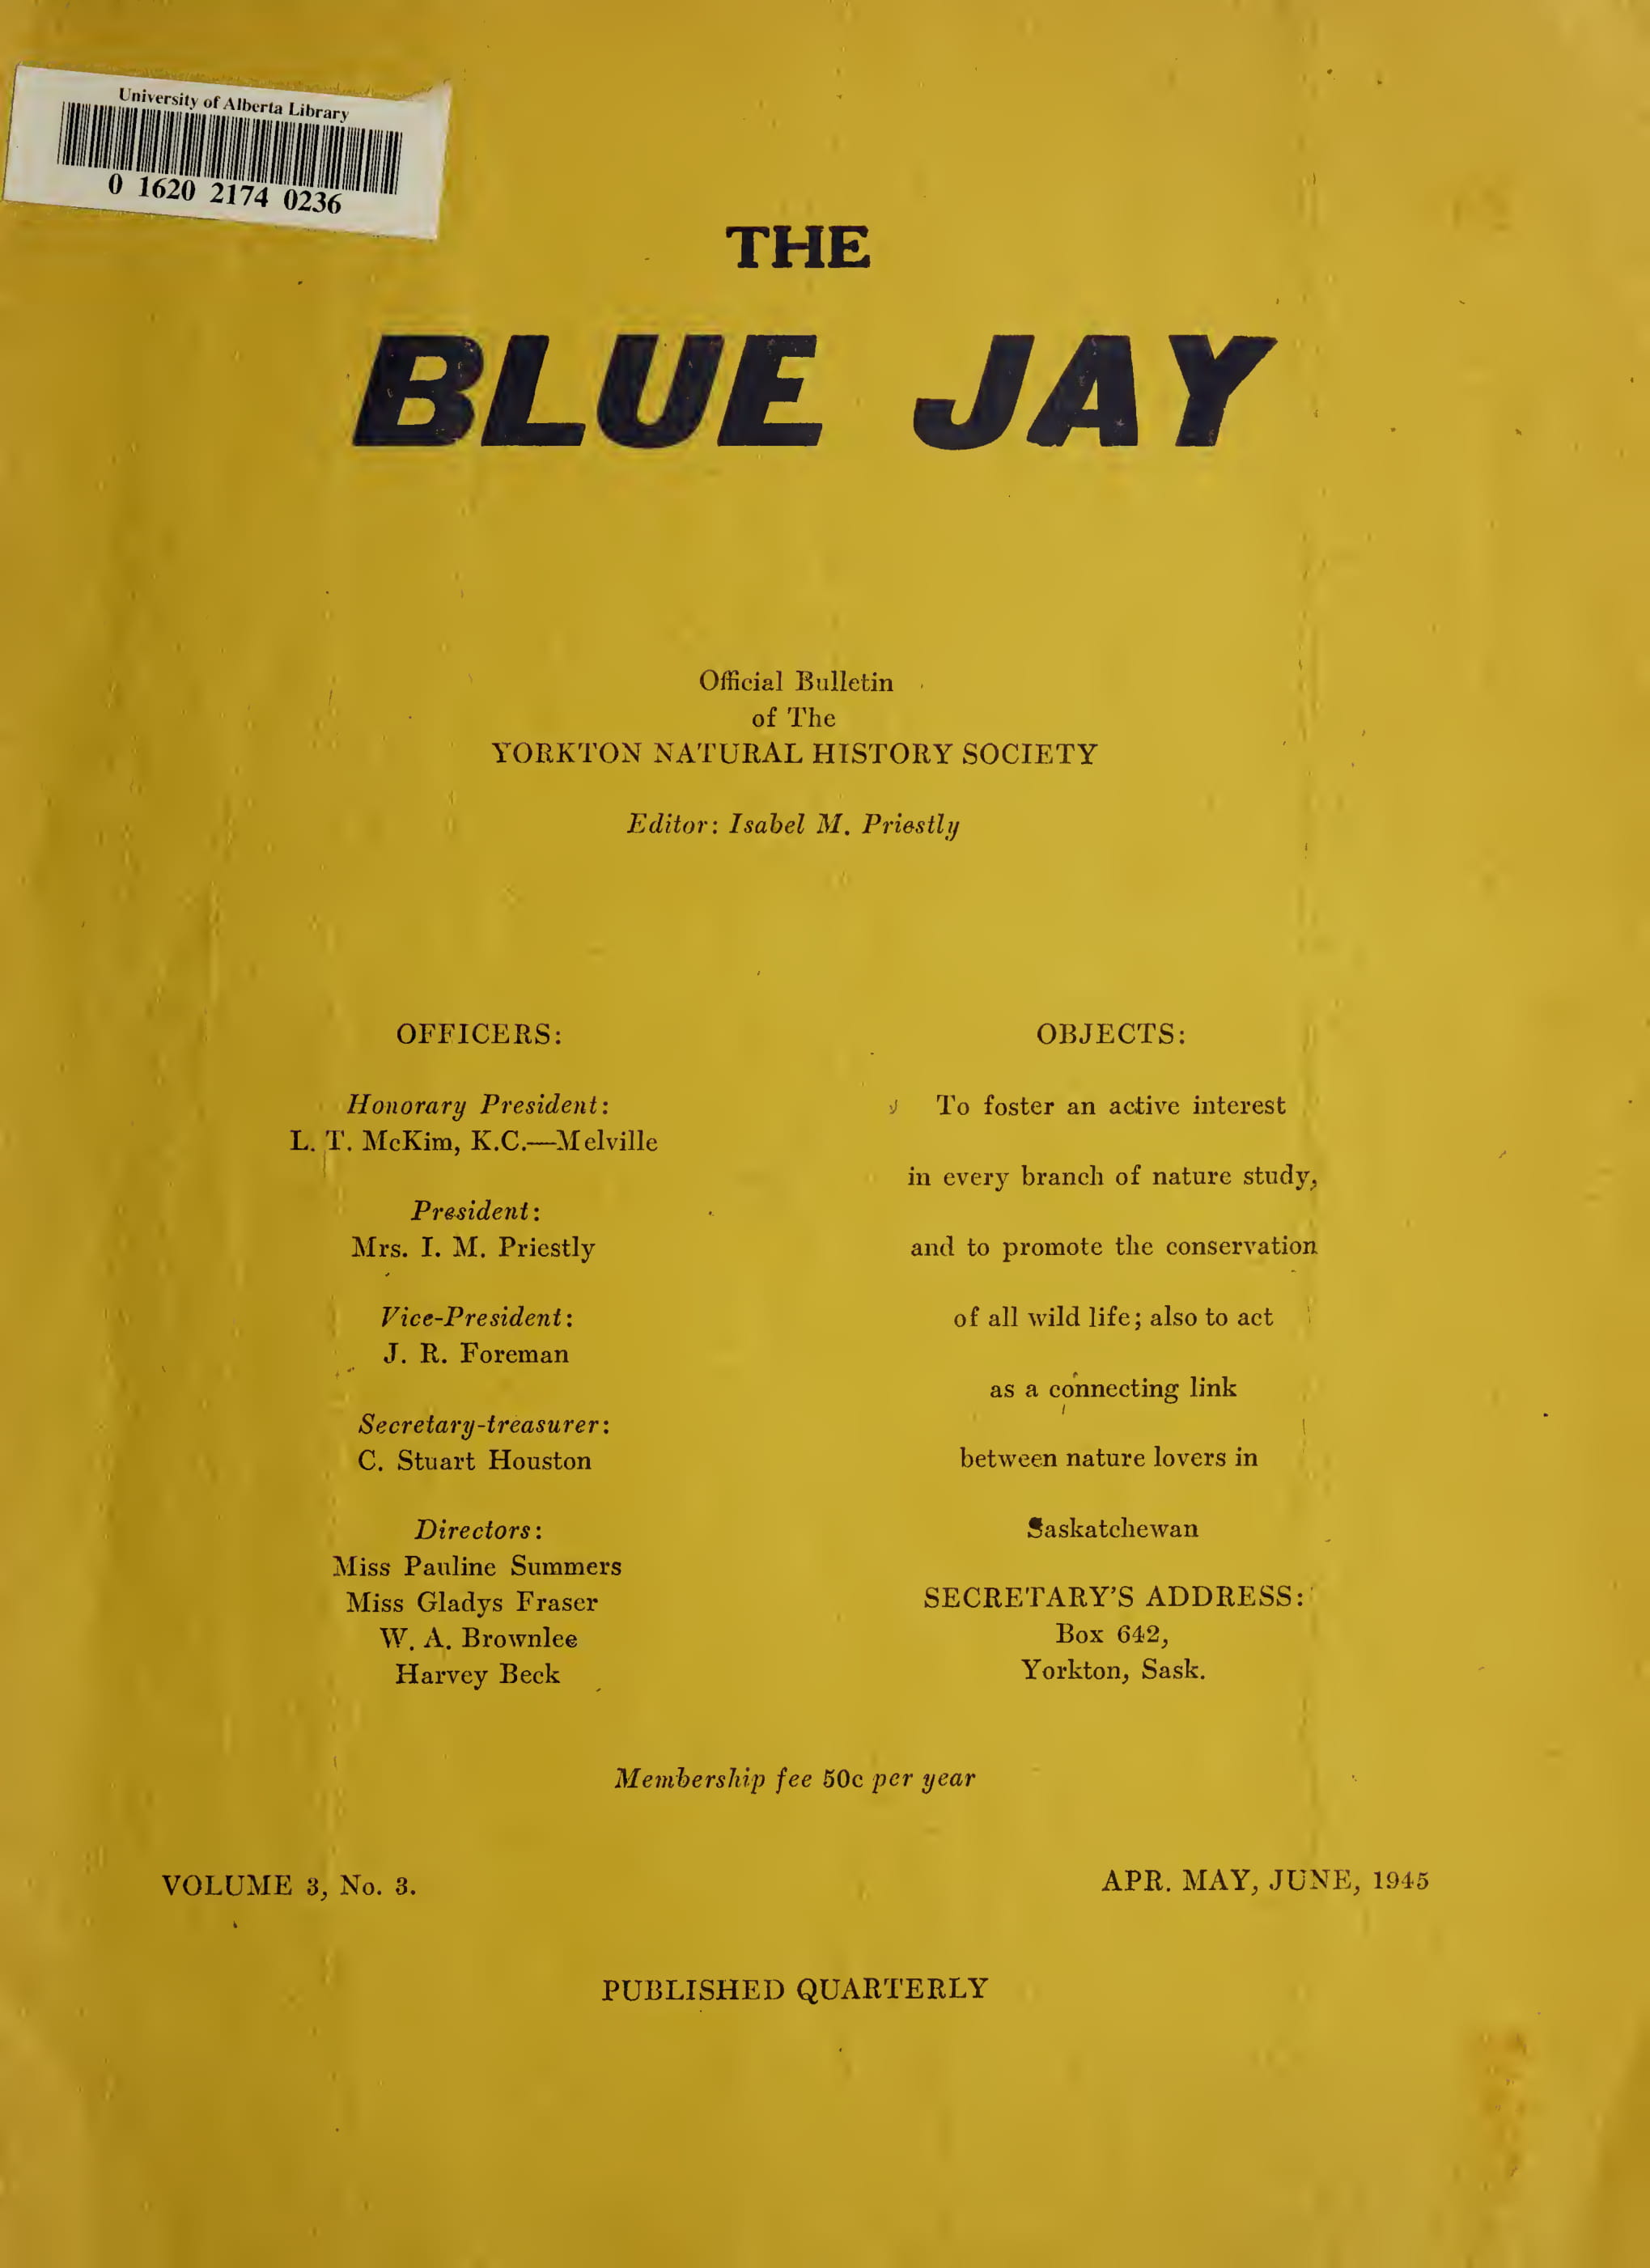 Cover Image for Spring 1945